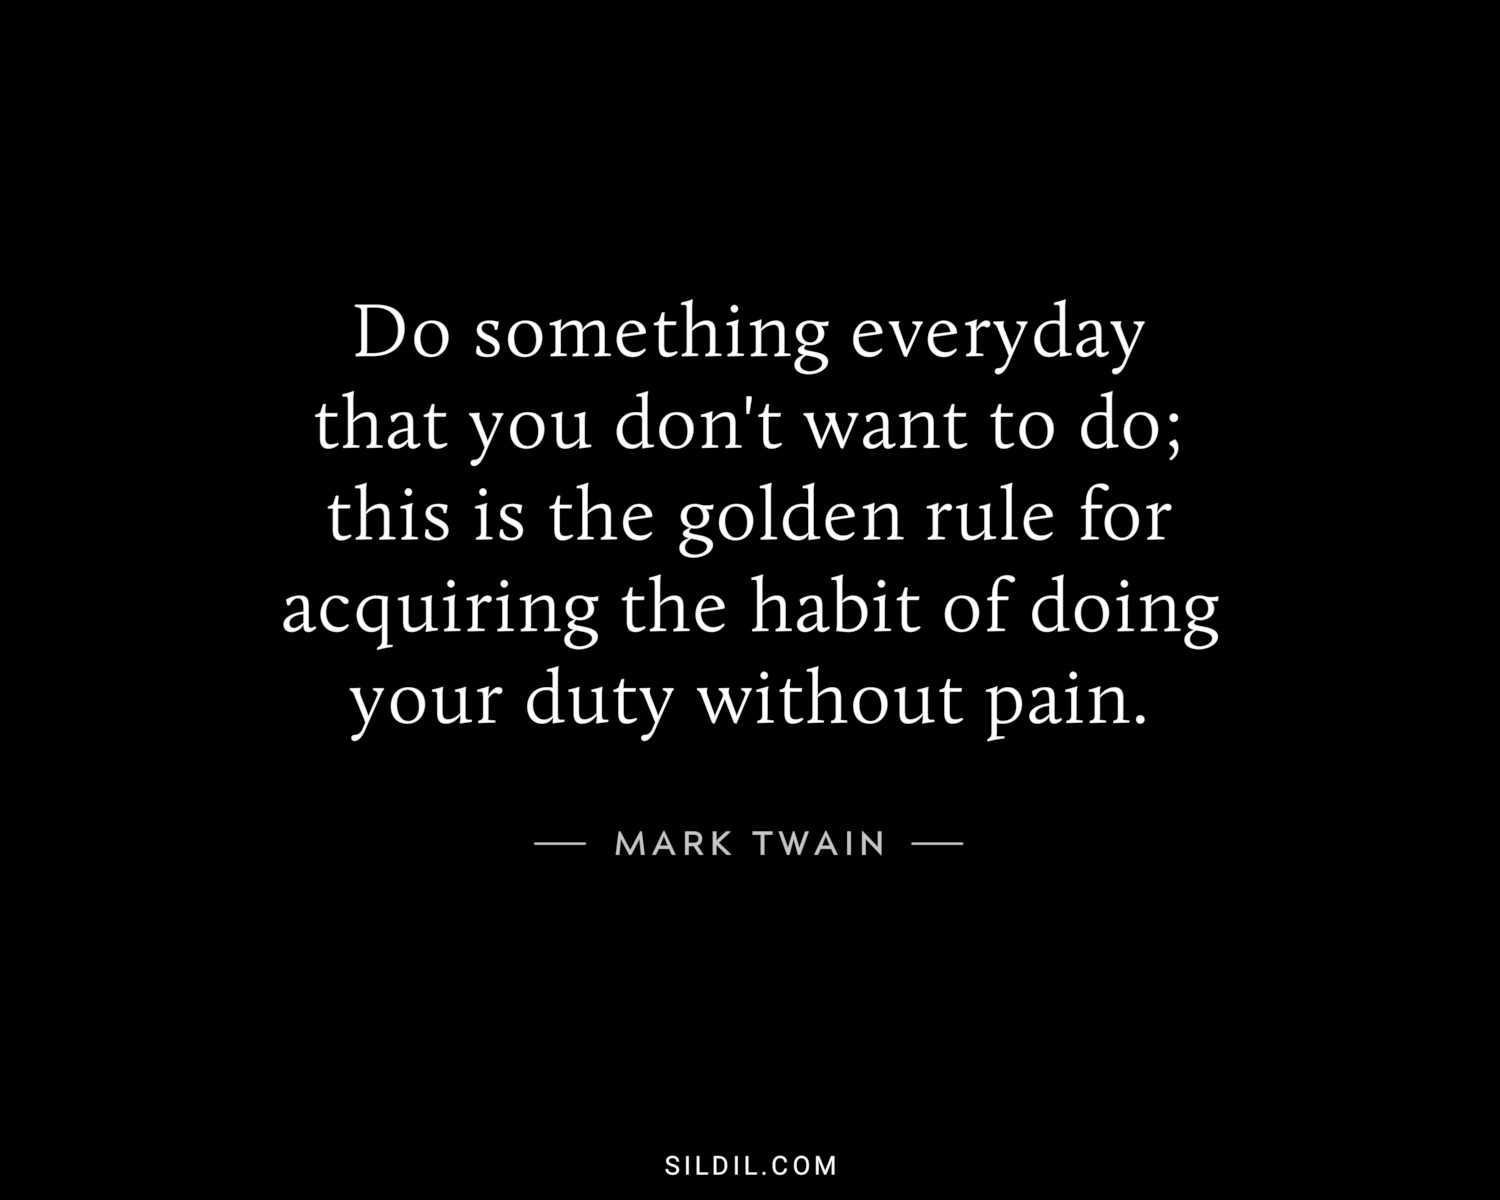 Do something everyday that you don't want to do; this is the golden rule for acquiring the habit of doing your duty without pain.